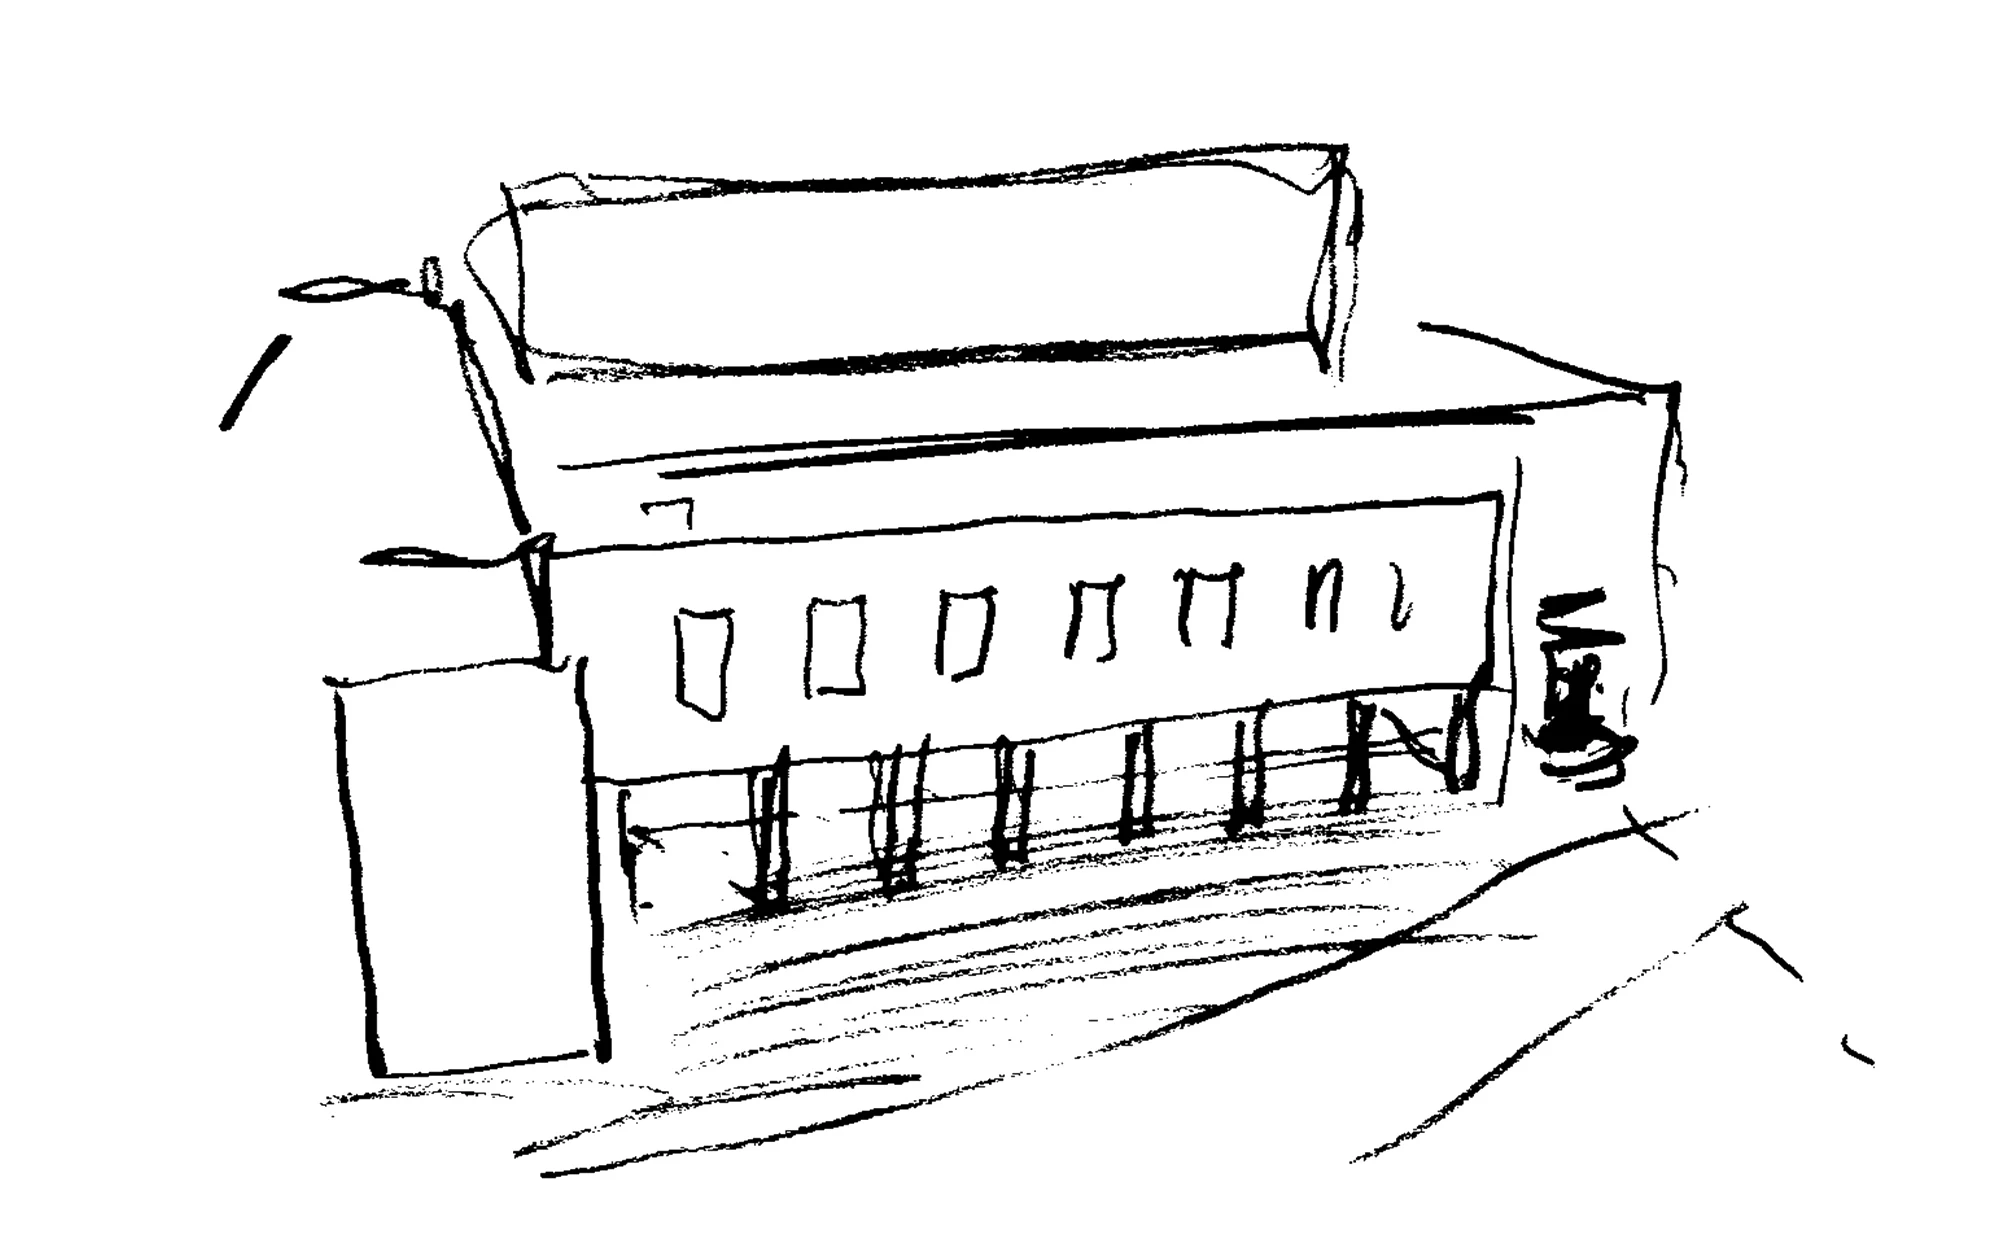 Concept sketch of the Weston Library